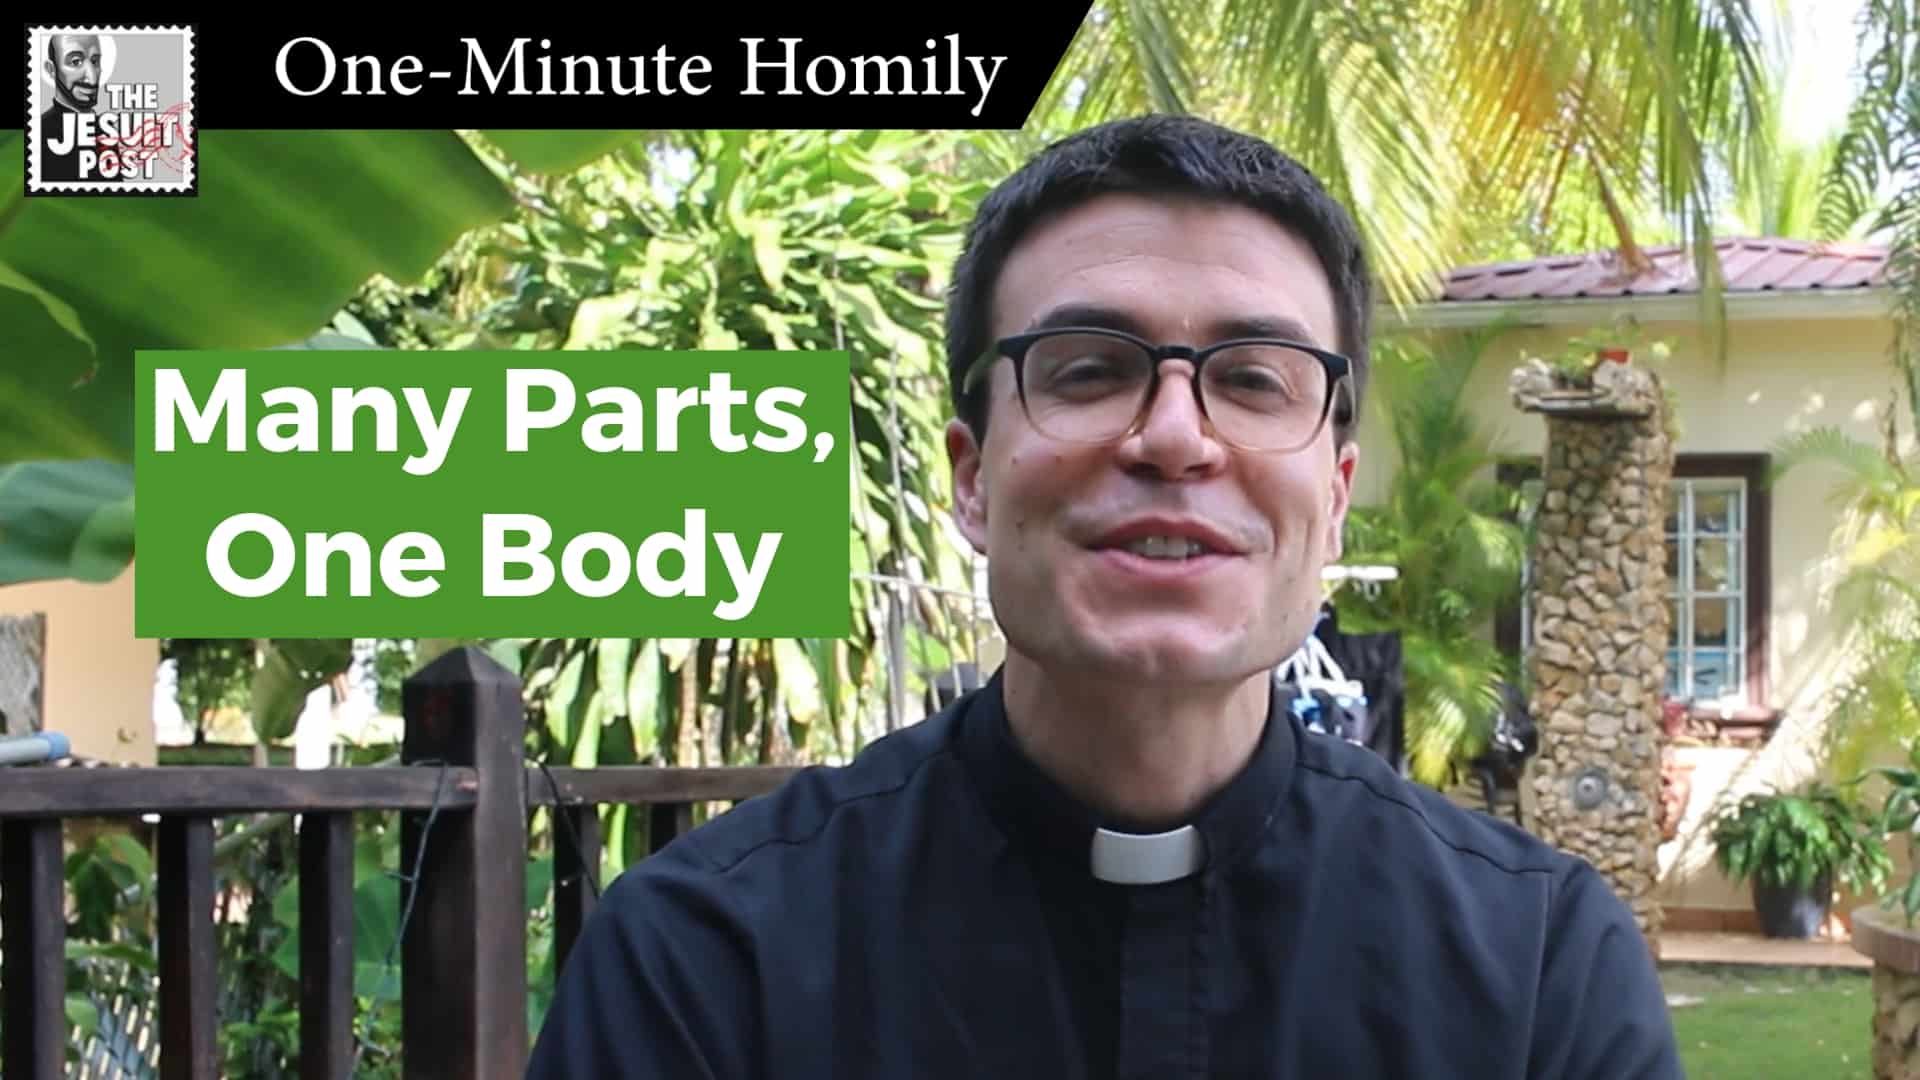 One-Minute Homily: “Many Parts, One Body”